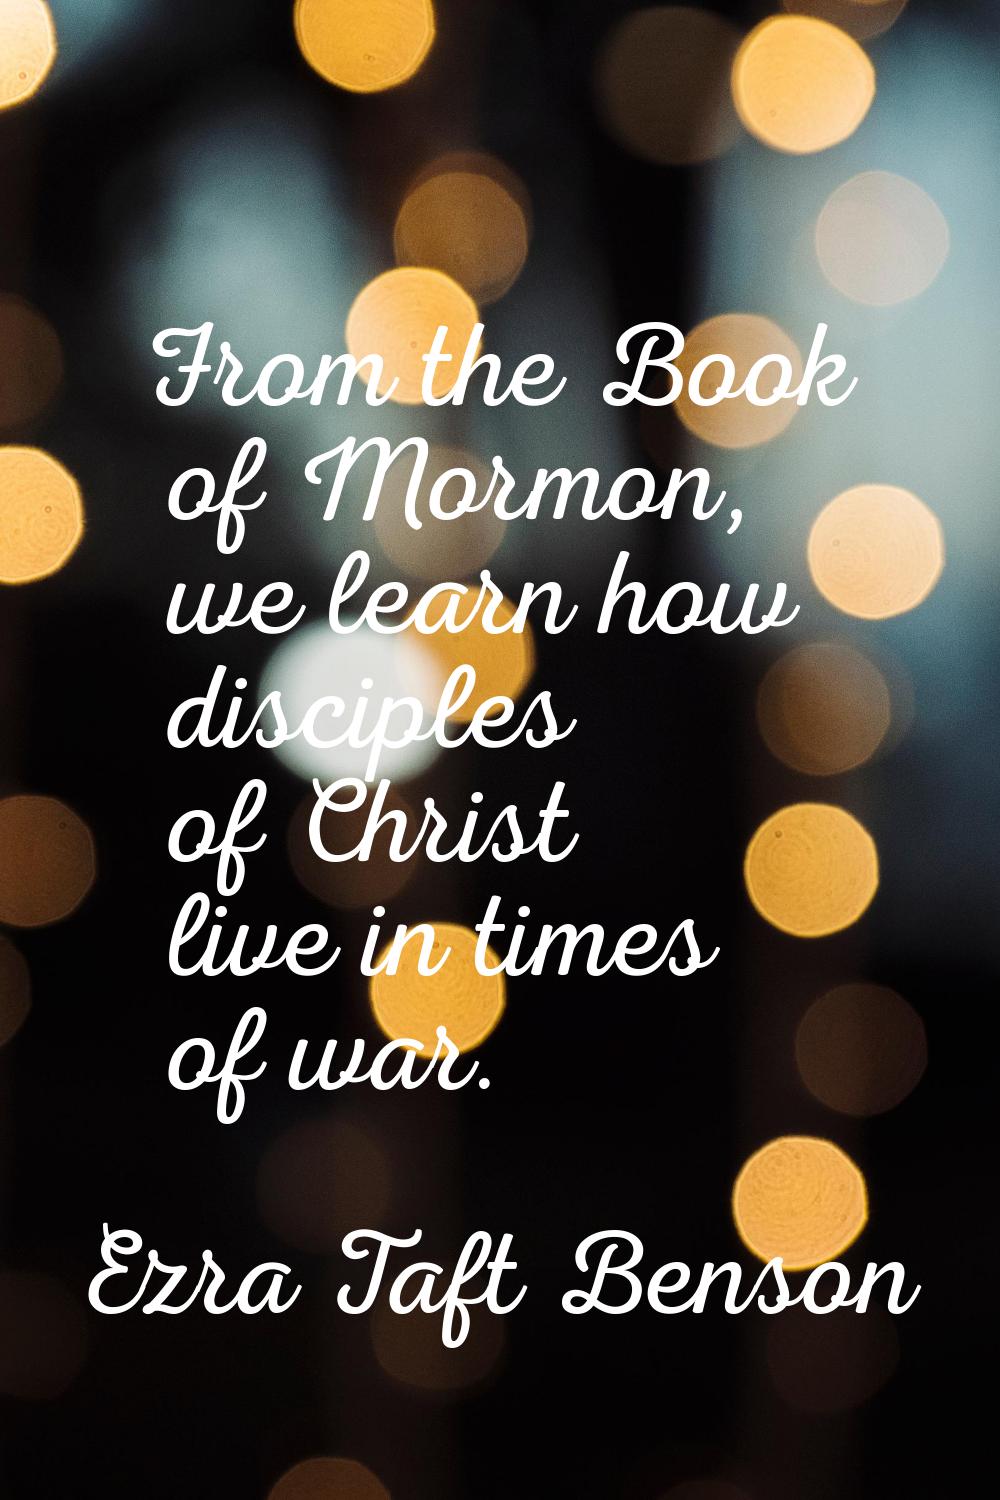 From the Book of Mormon, we learn how disciples of Christ live in times of war.